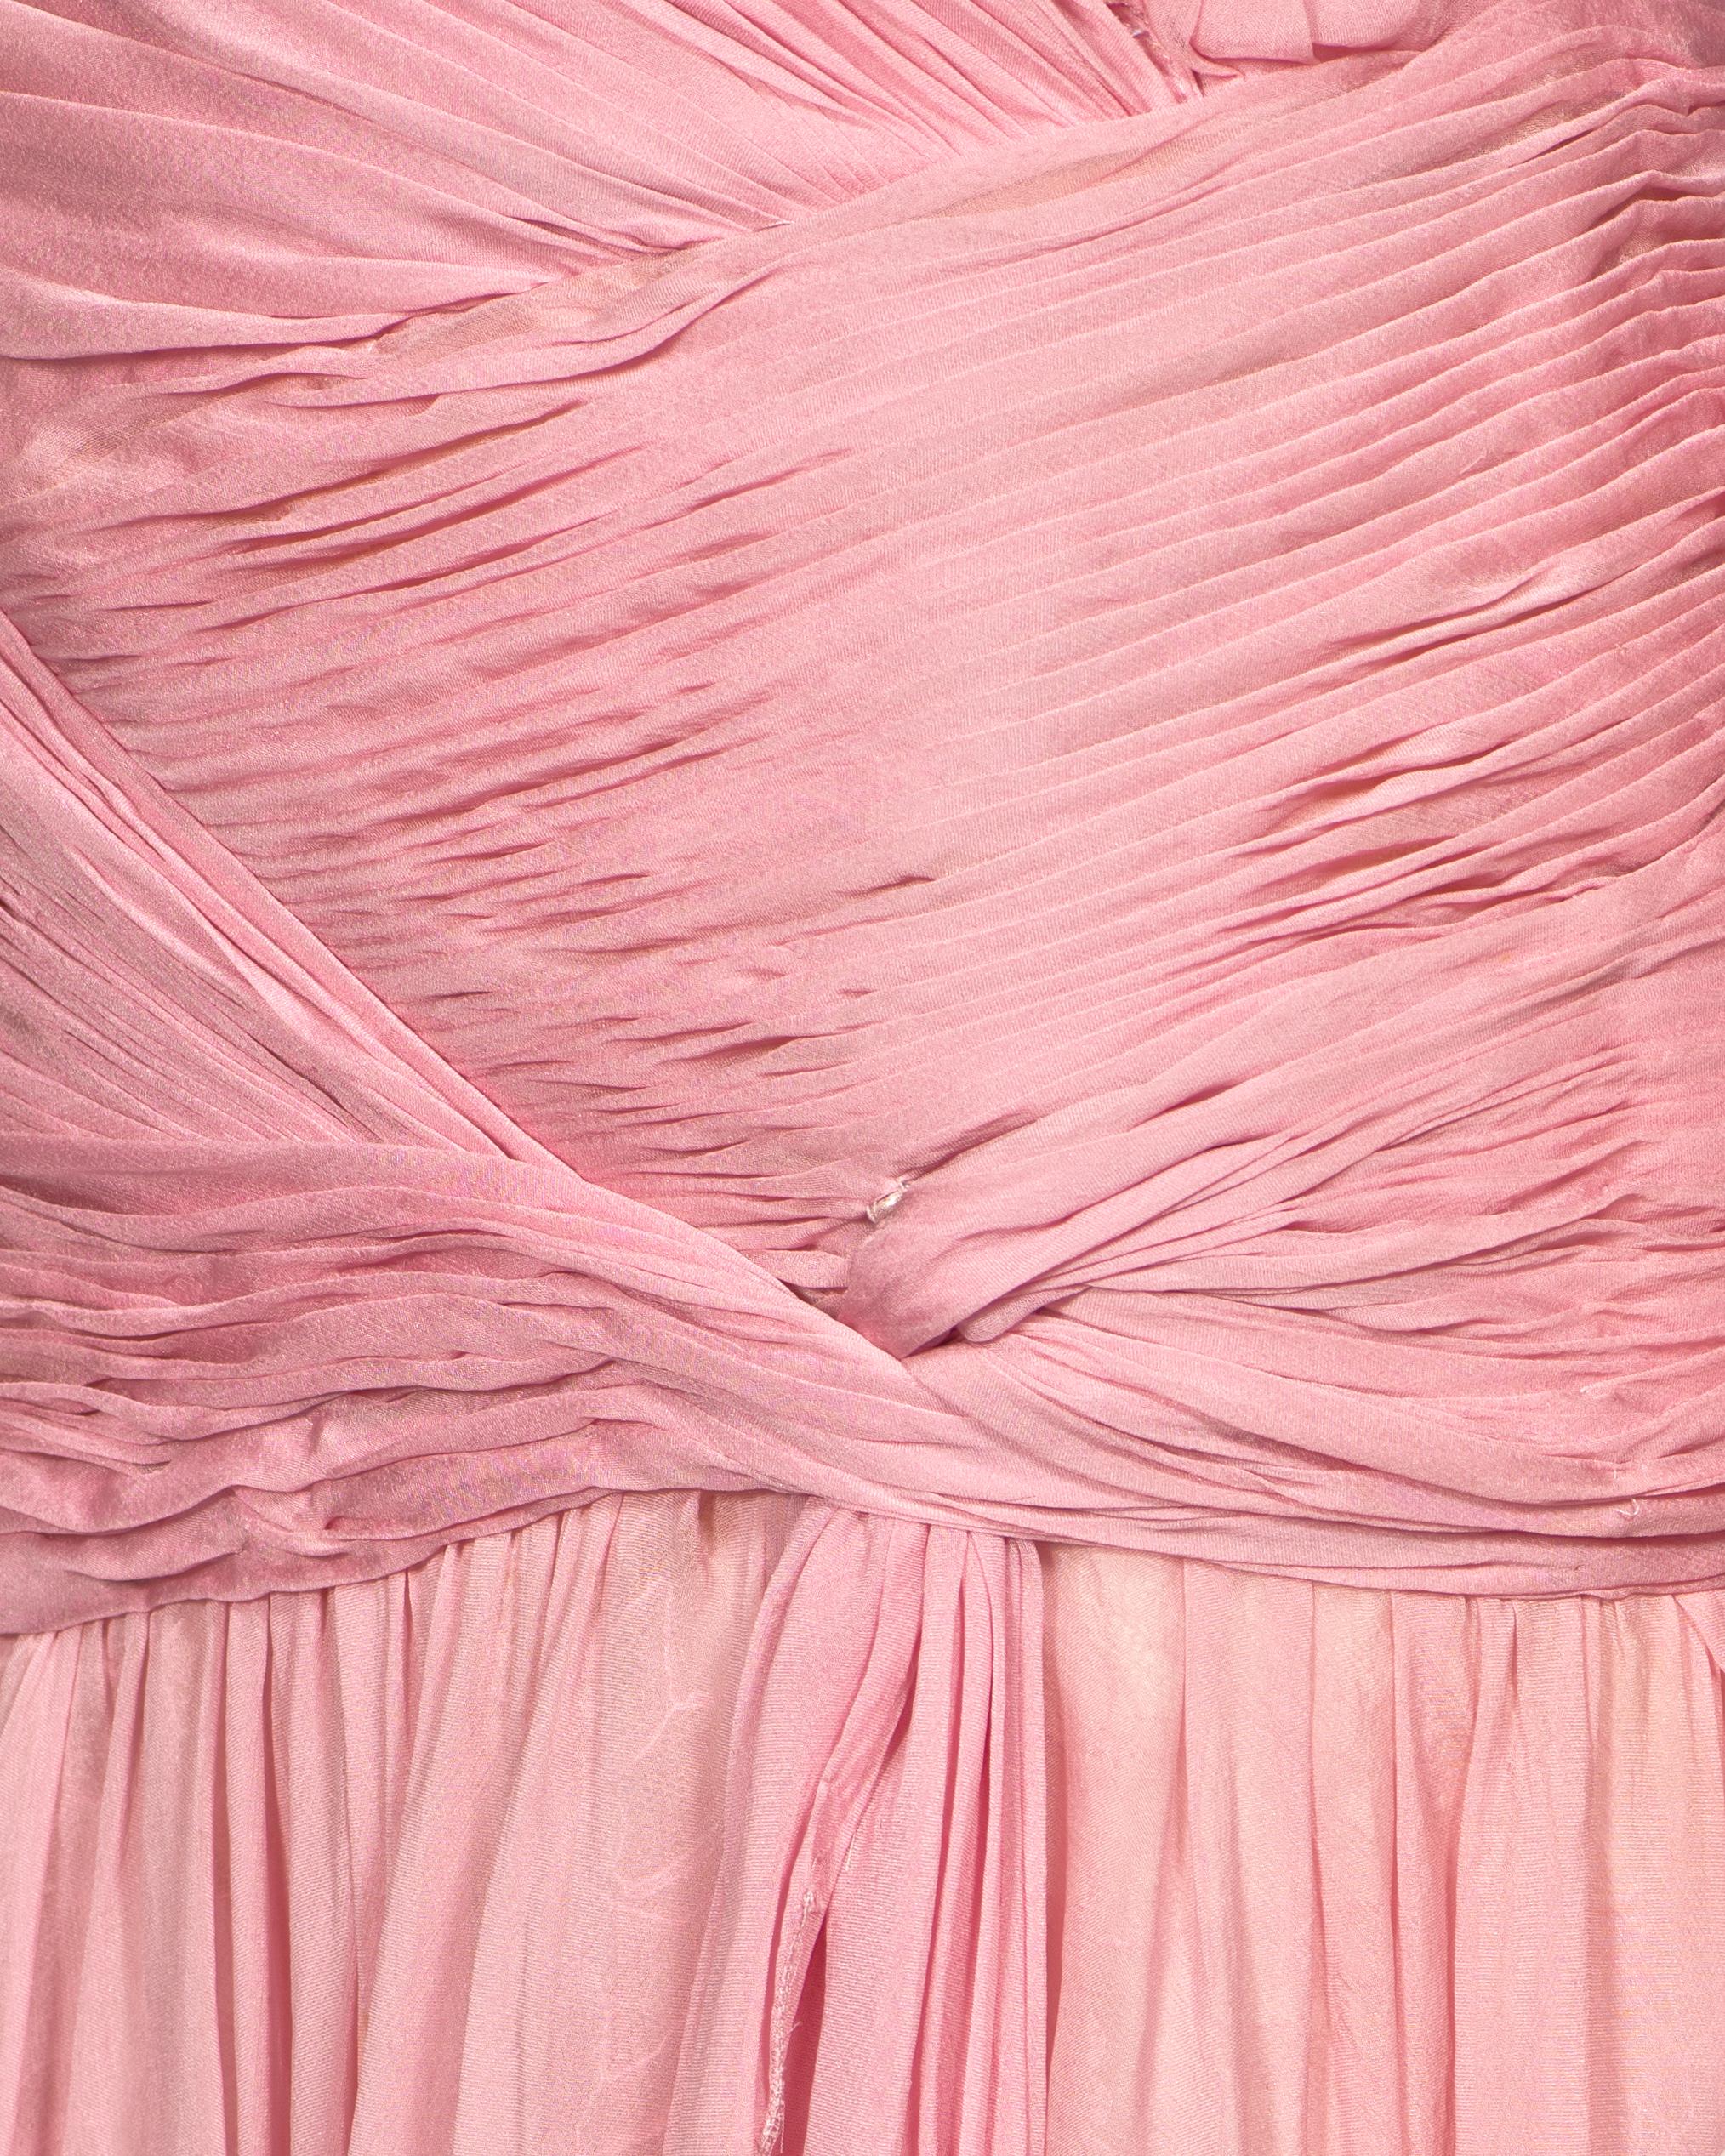 Atelier Versace Couture Pink Pleated Silk and Lace Mini Dress, ss 2004 For Sale 9